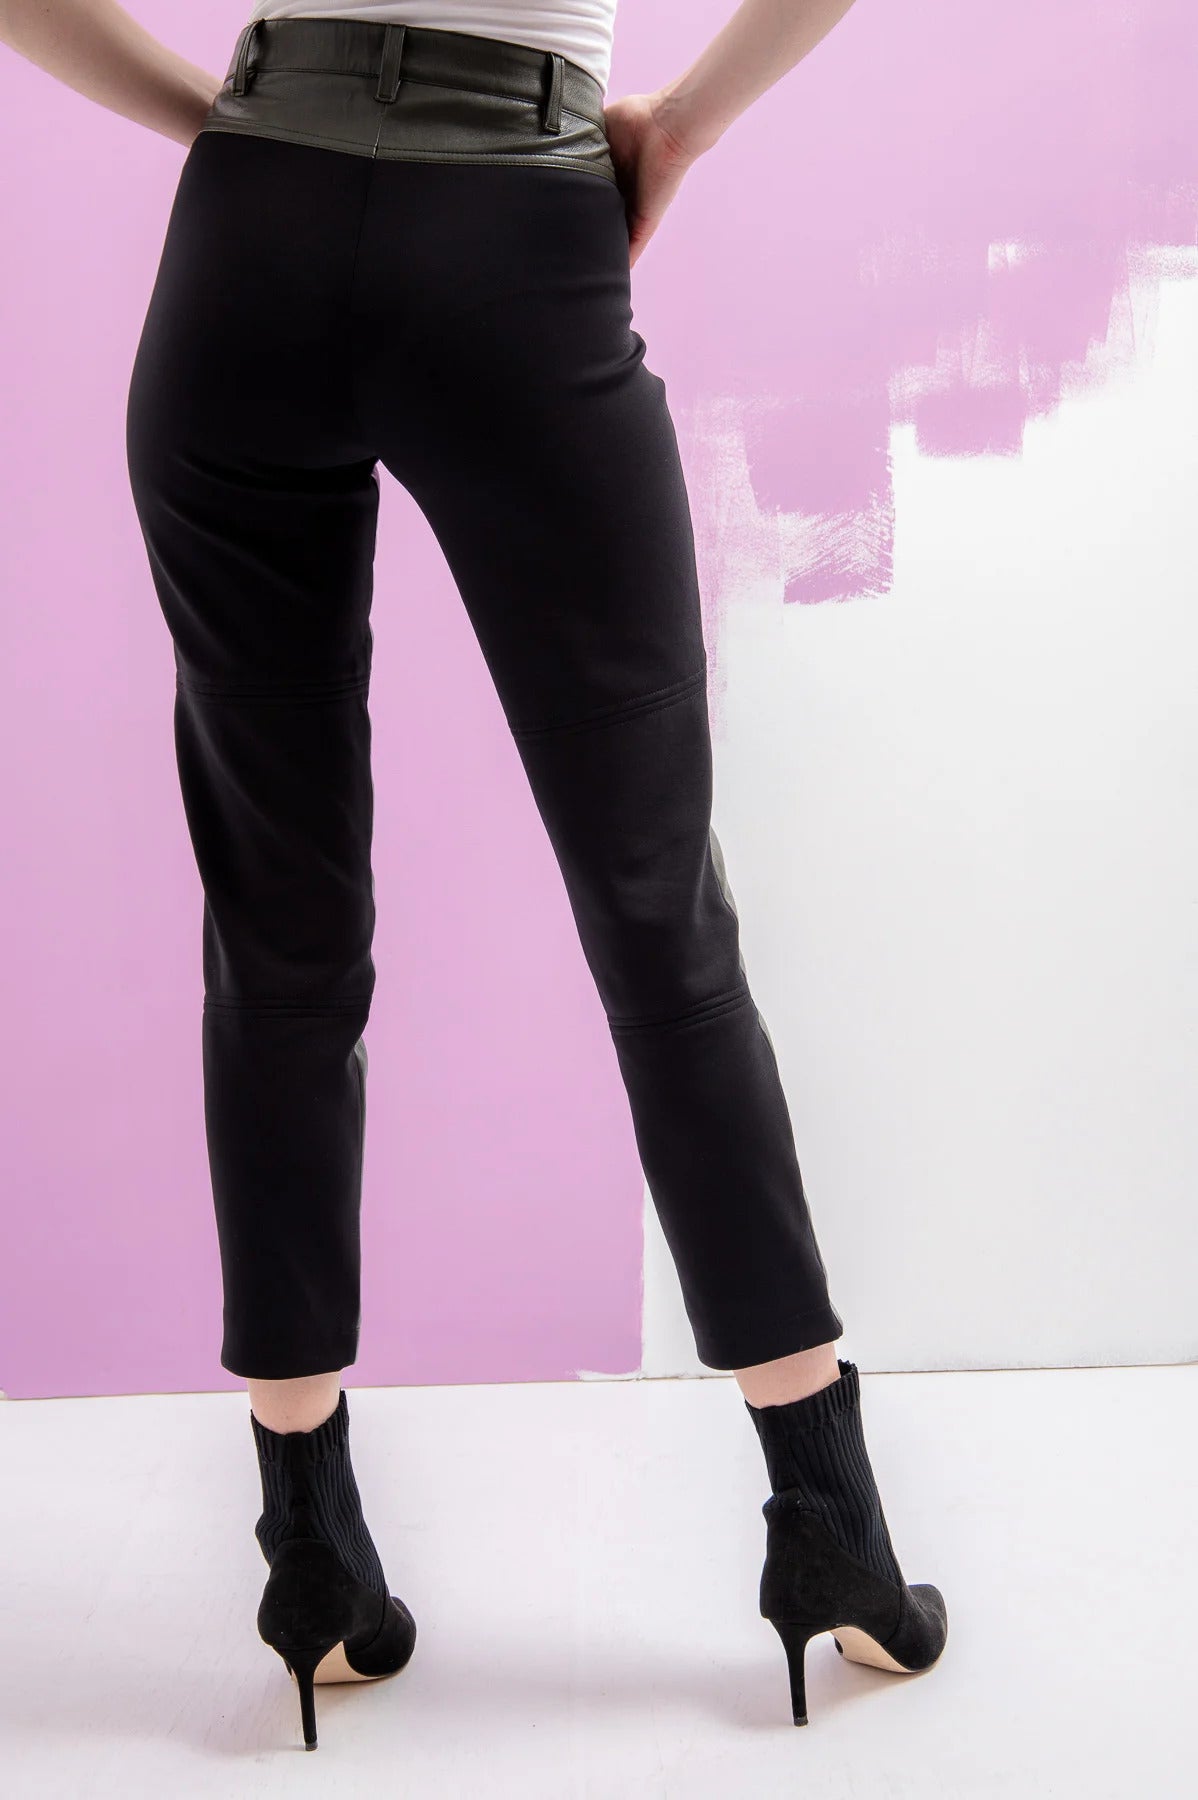 Leather Trousers in a 7/8 Length